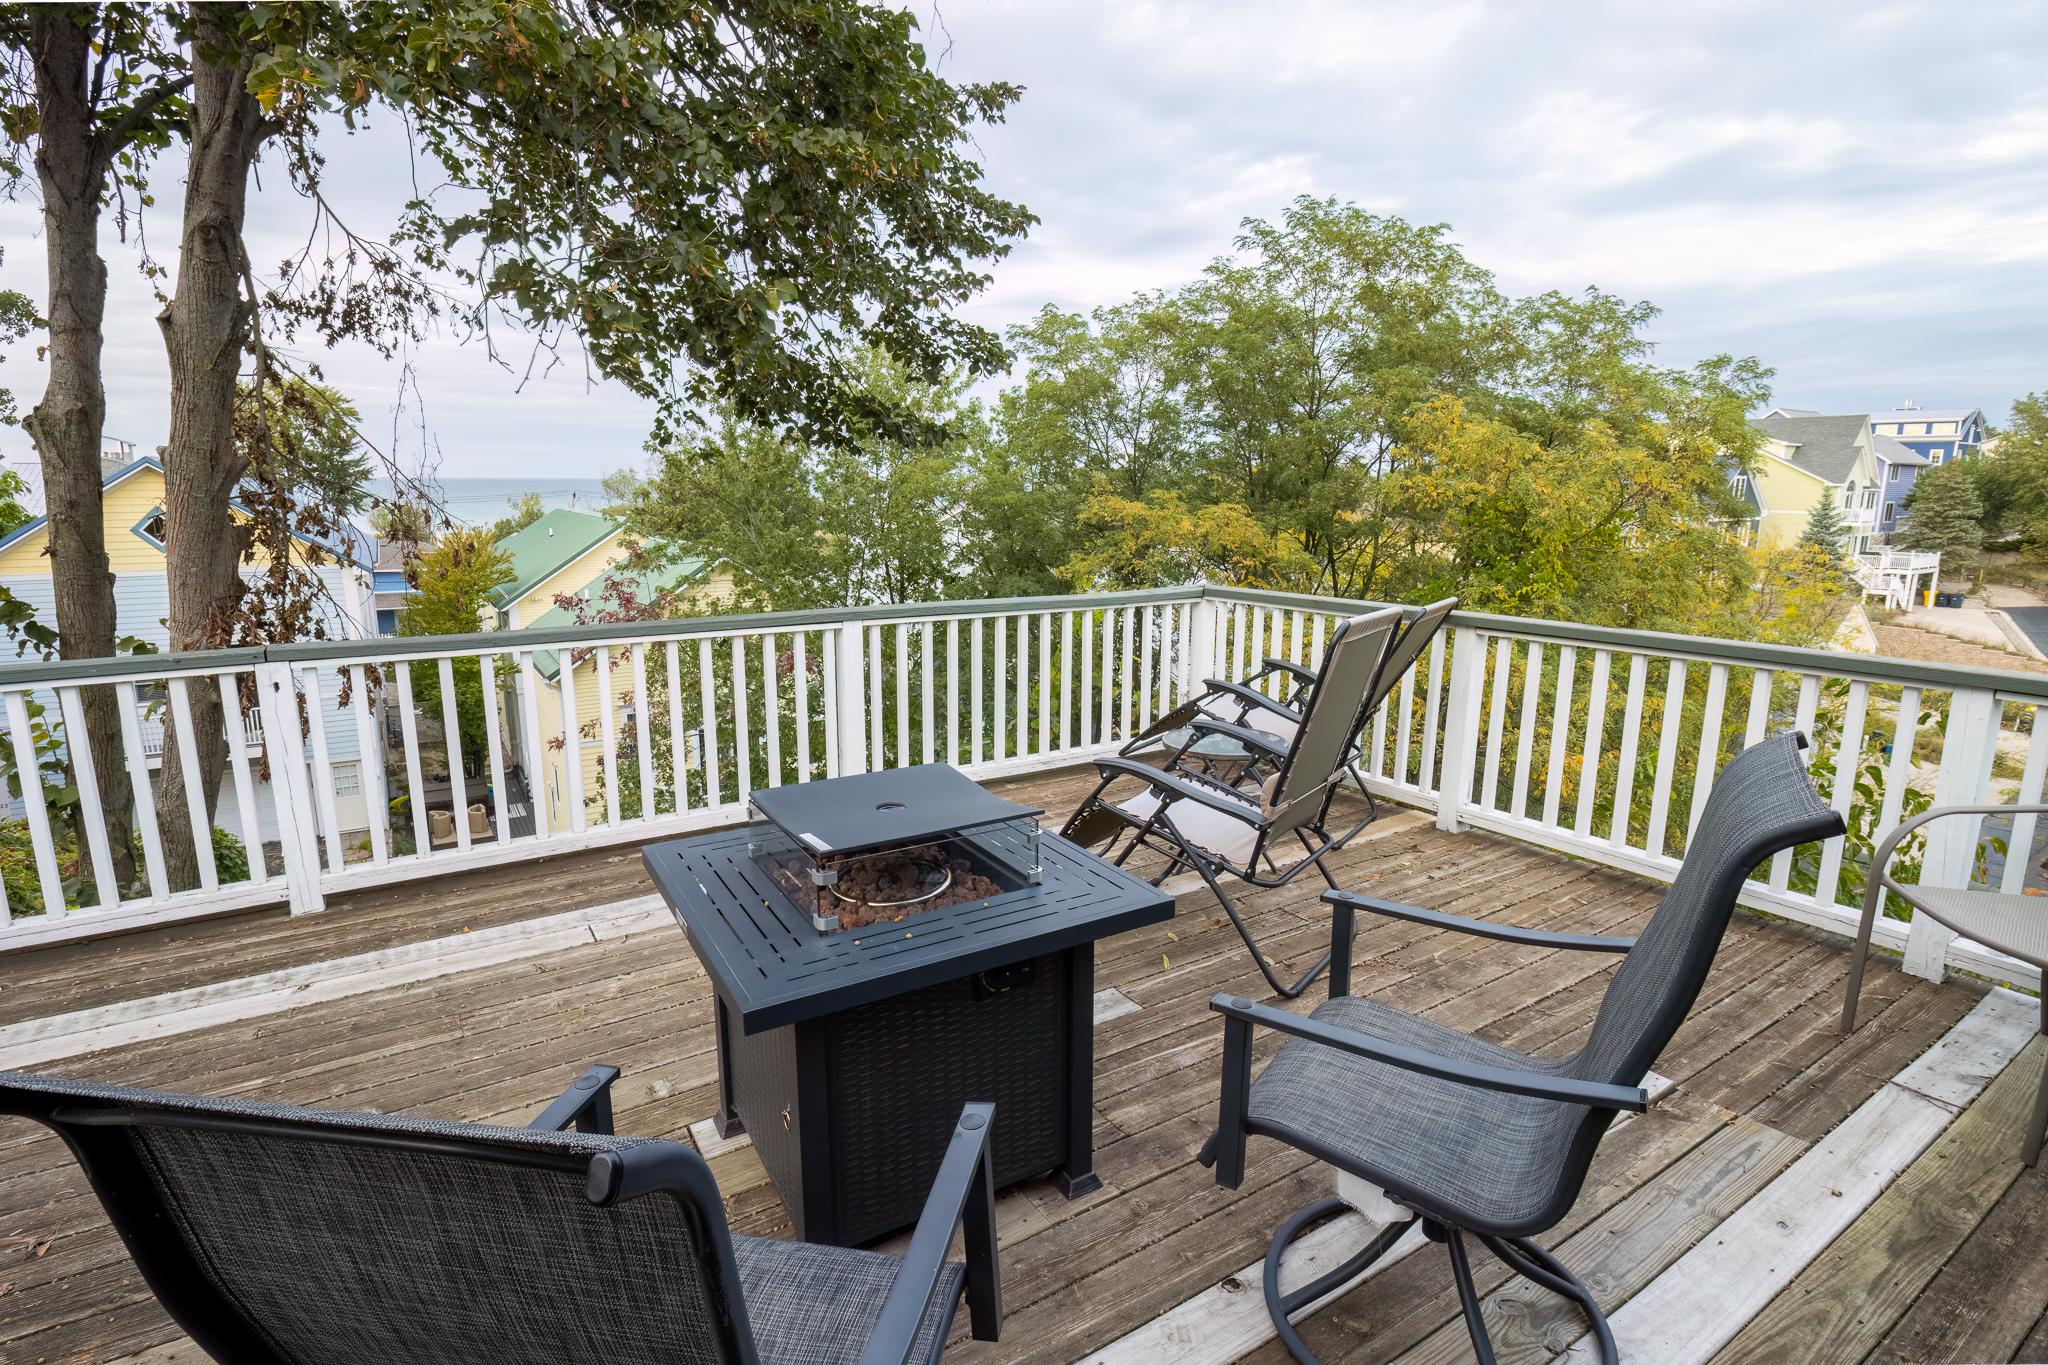 Third Level Lake Michigan View | Deck with Fire Pit